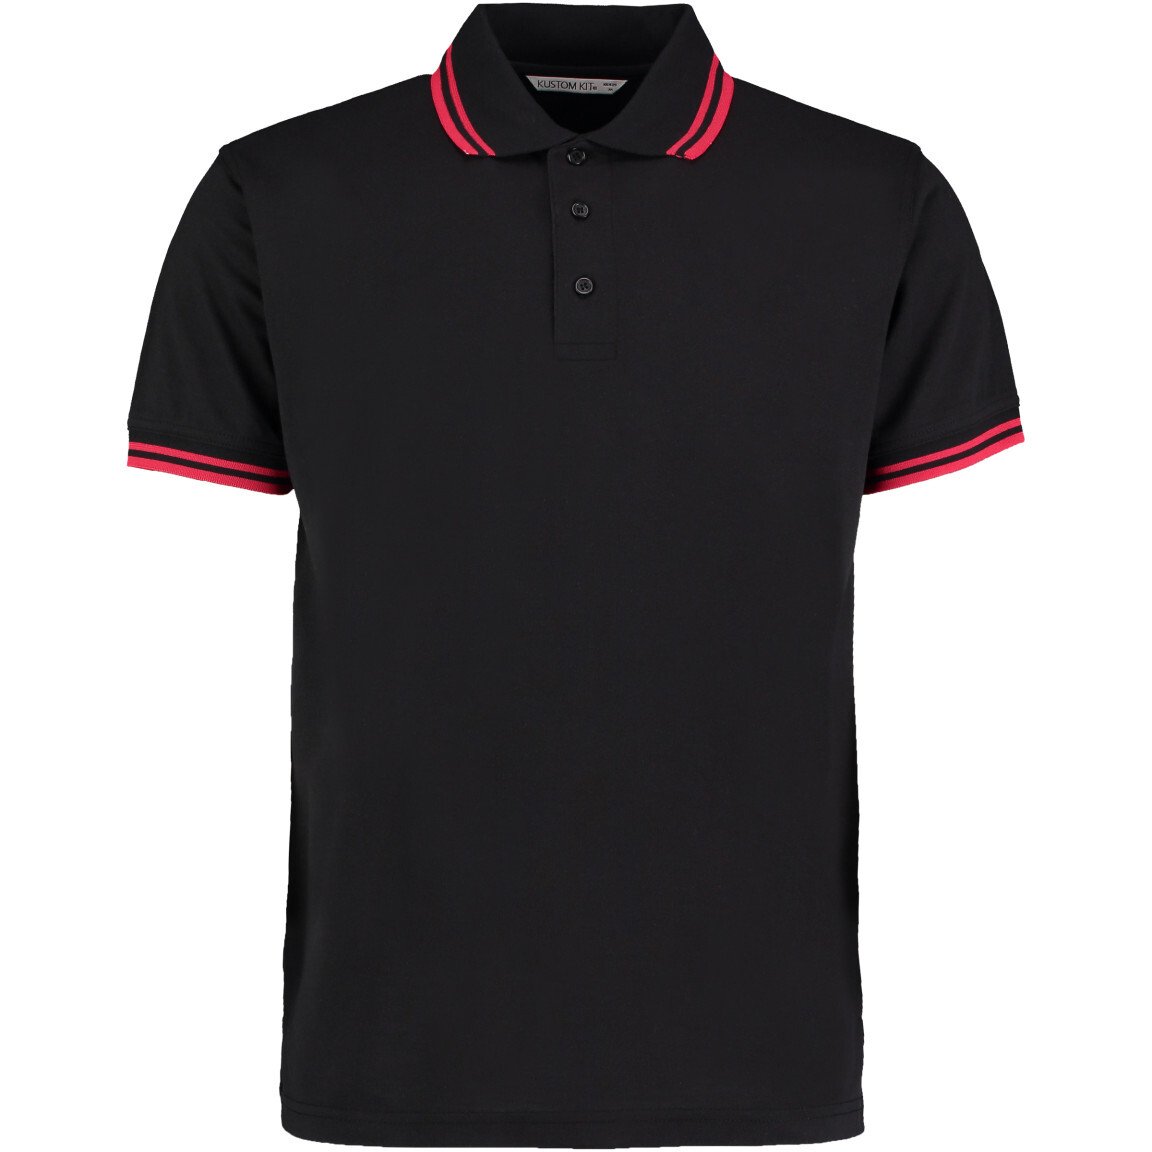 Kustom Kit KK409 Classic Fit Tipped Collar Polo Shirt from Lawson HIS